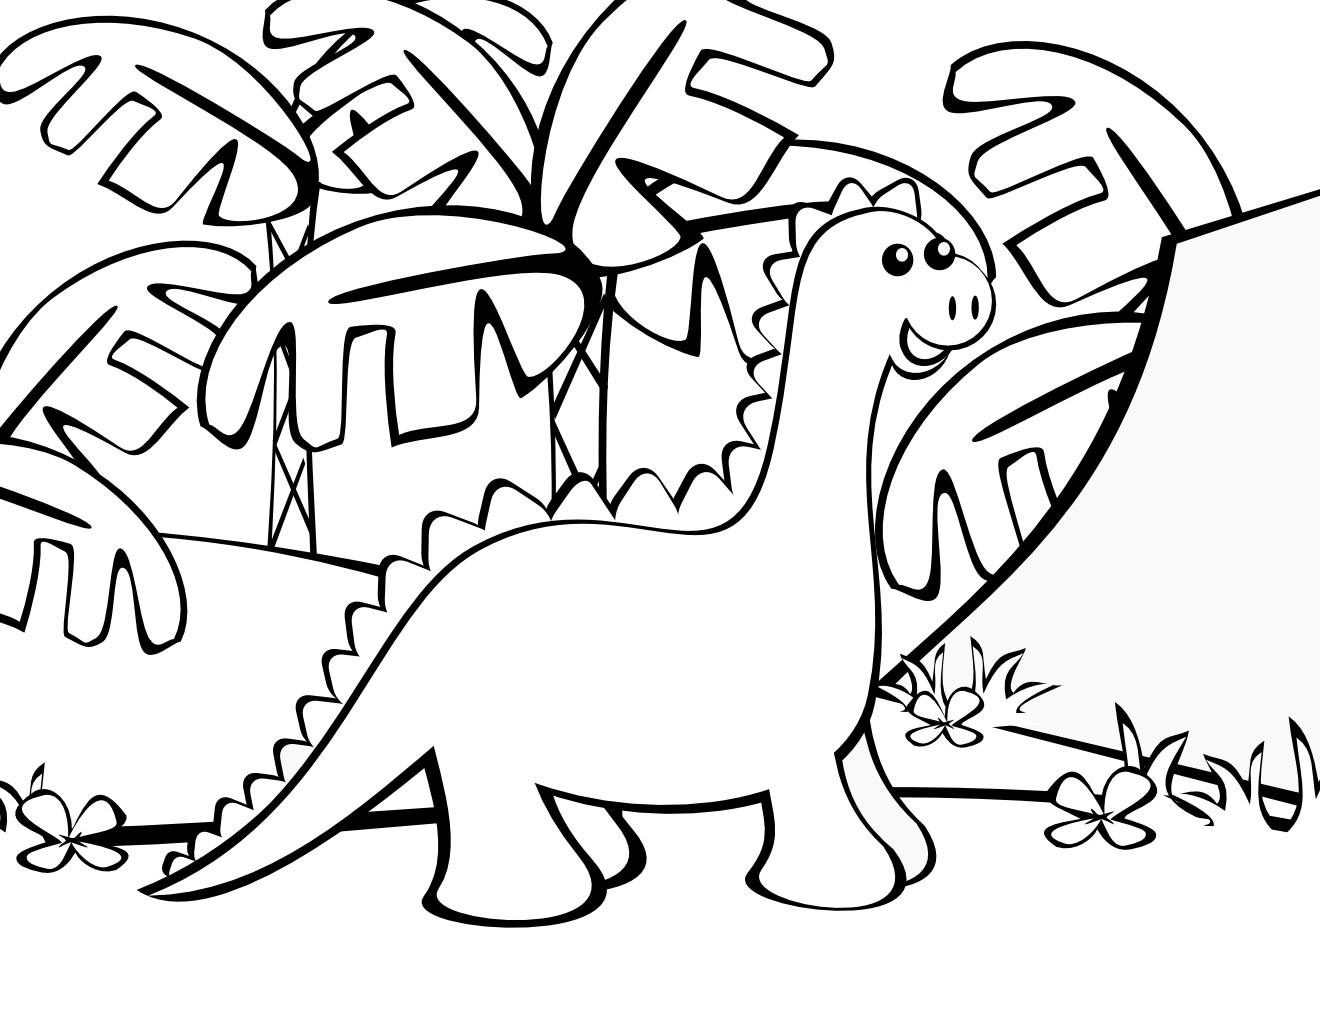 Printable Dinosaur Coloring Pages
 Free Coloring Pages Dinosaur Coloring Pages